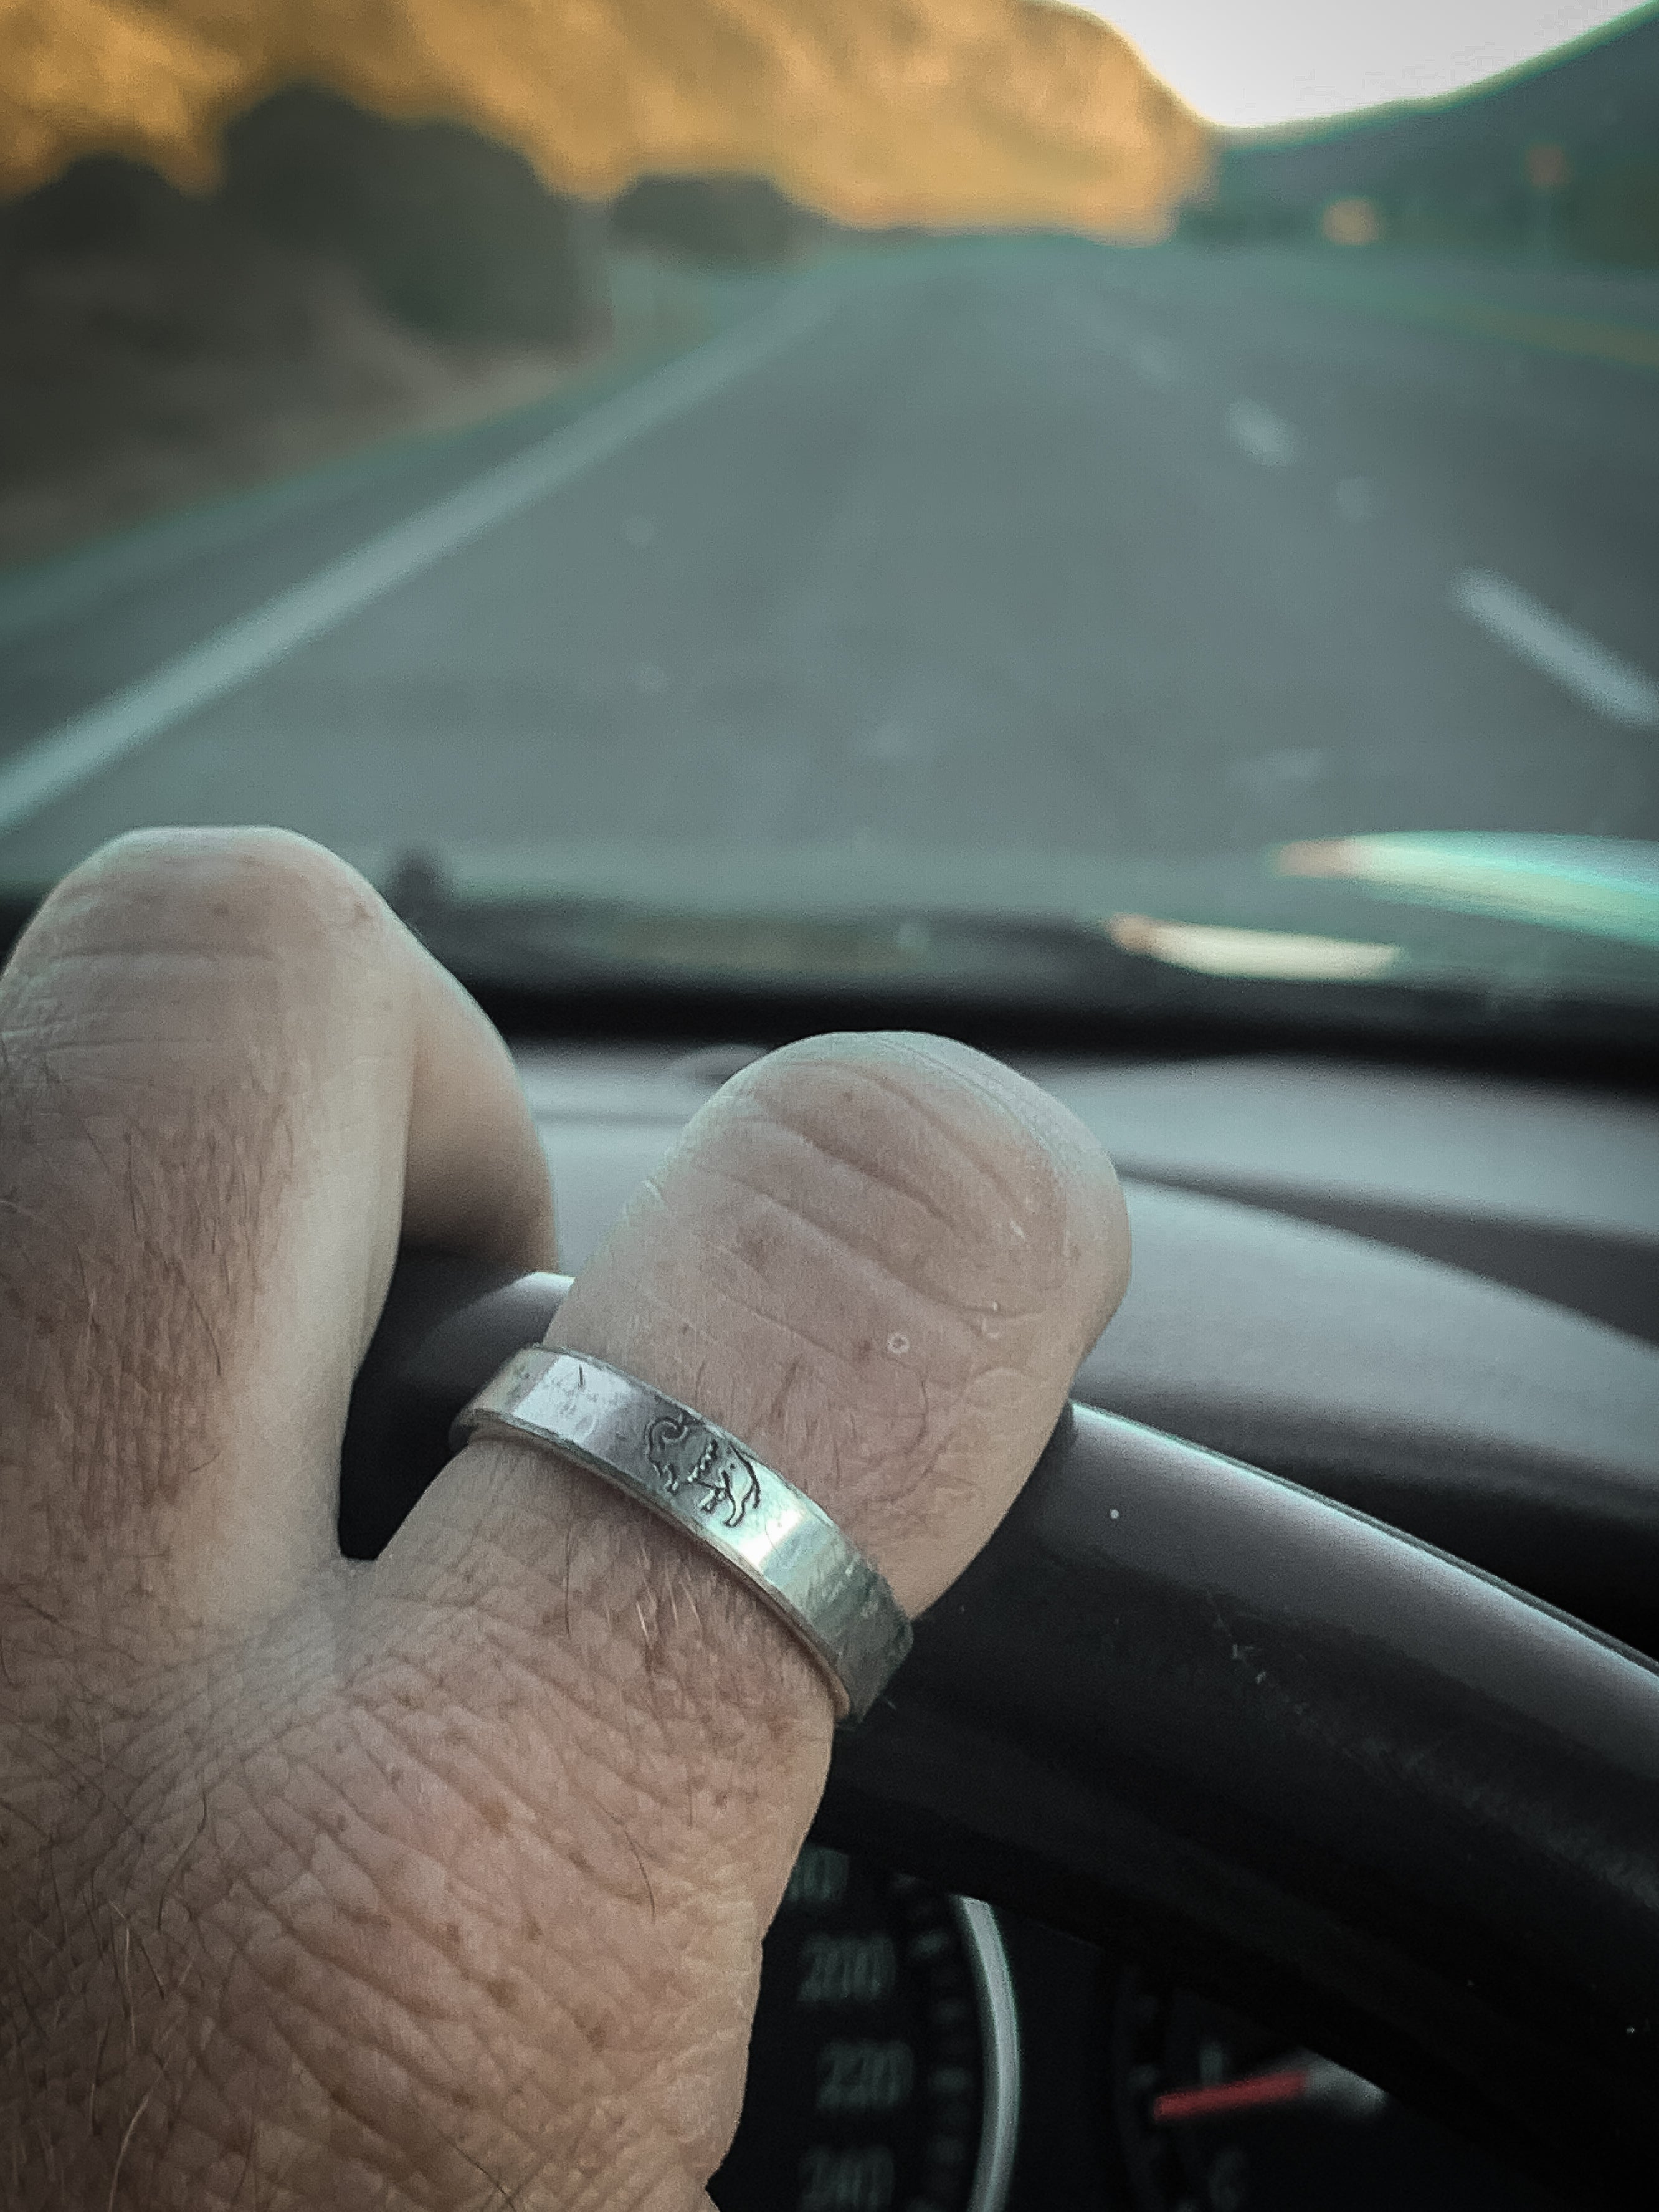 The Wild Bison Ring